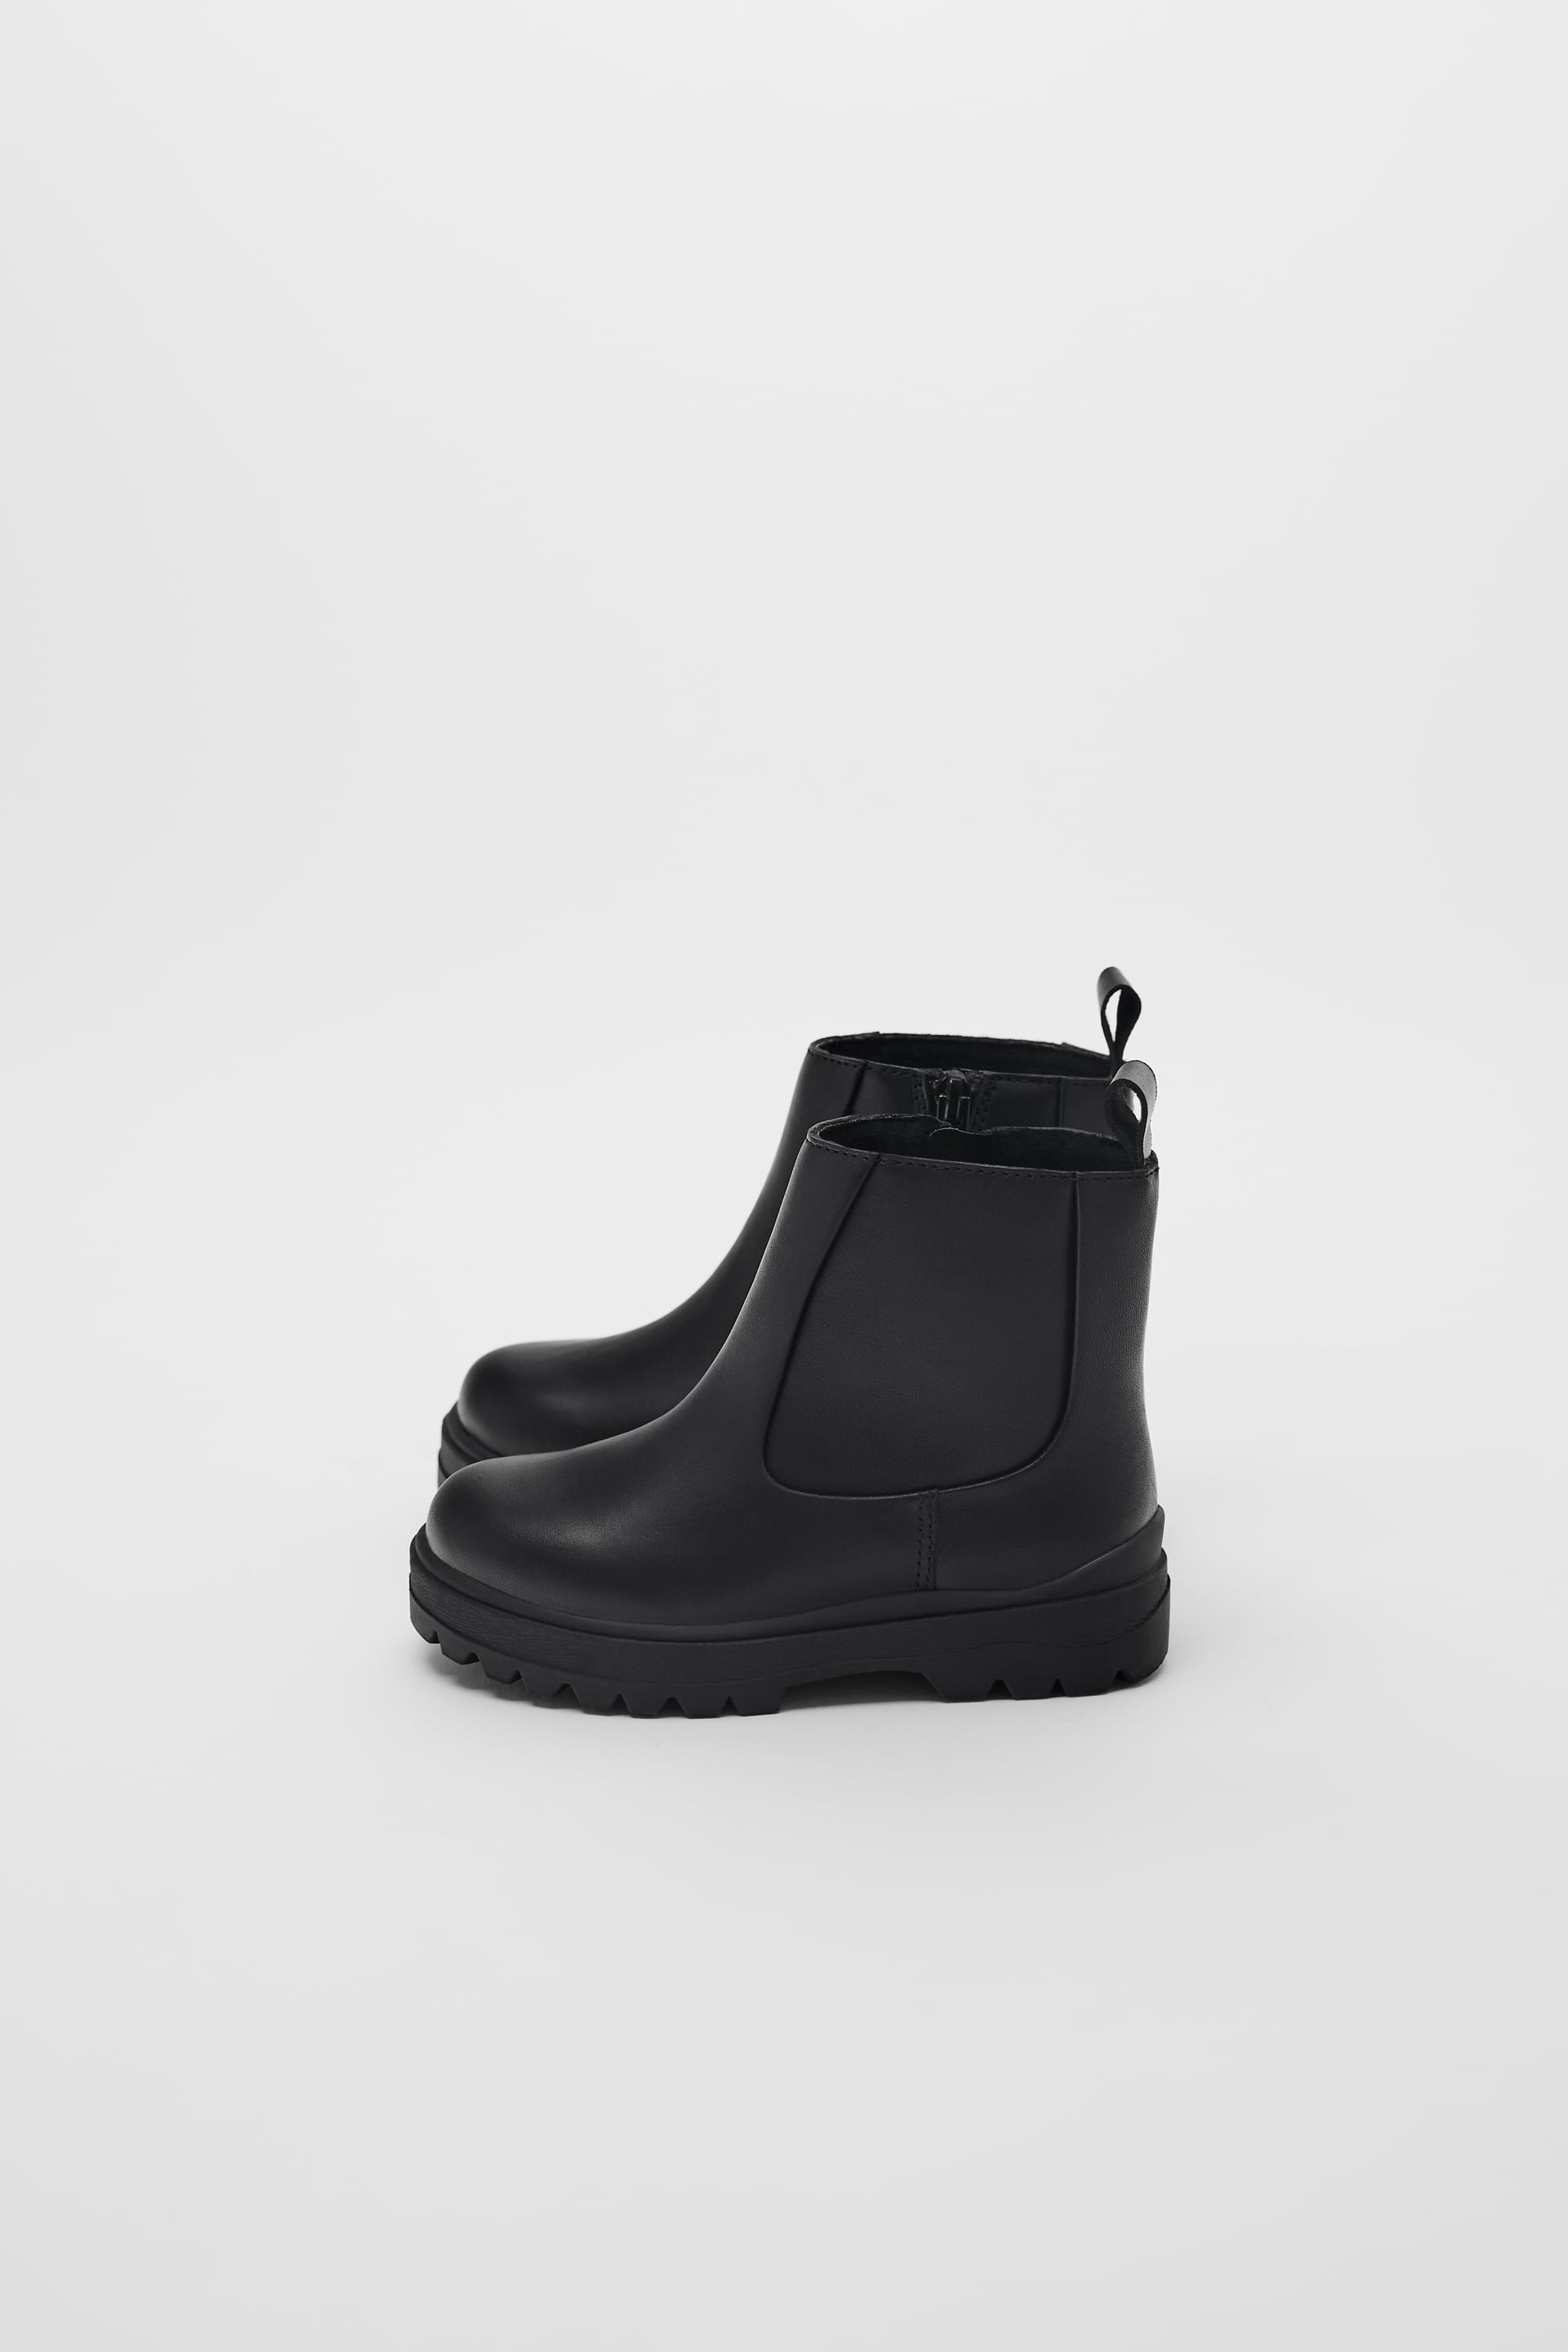 Zara LEATHER BOOTS - 51416460-040-2